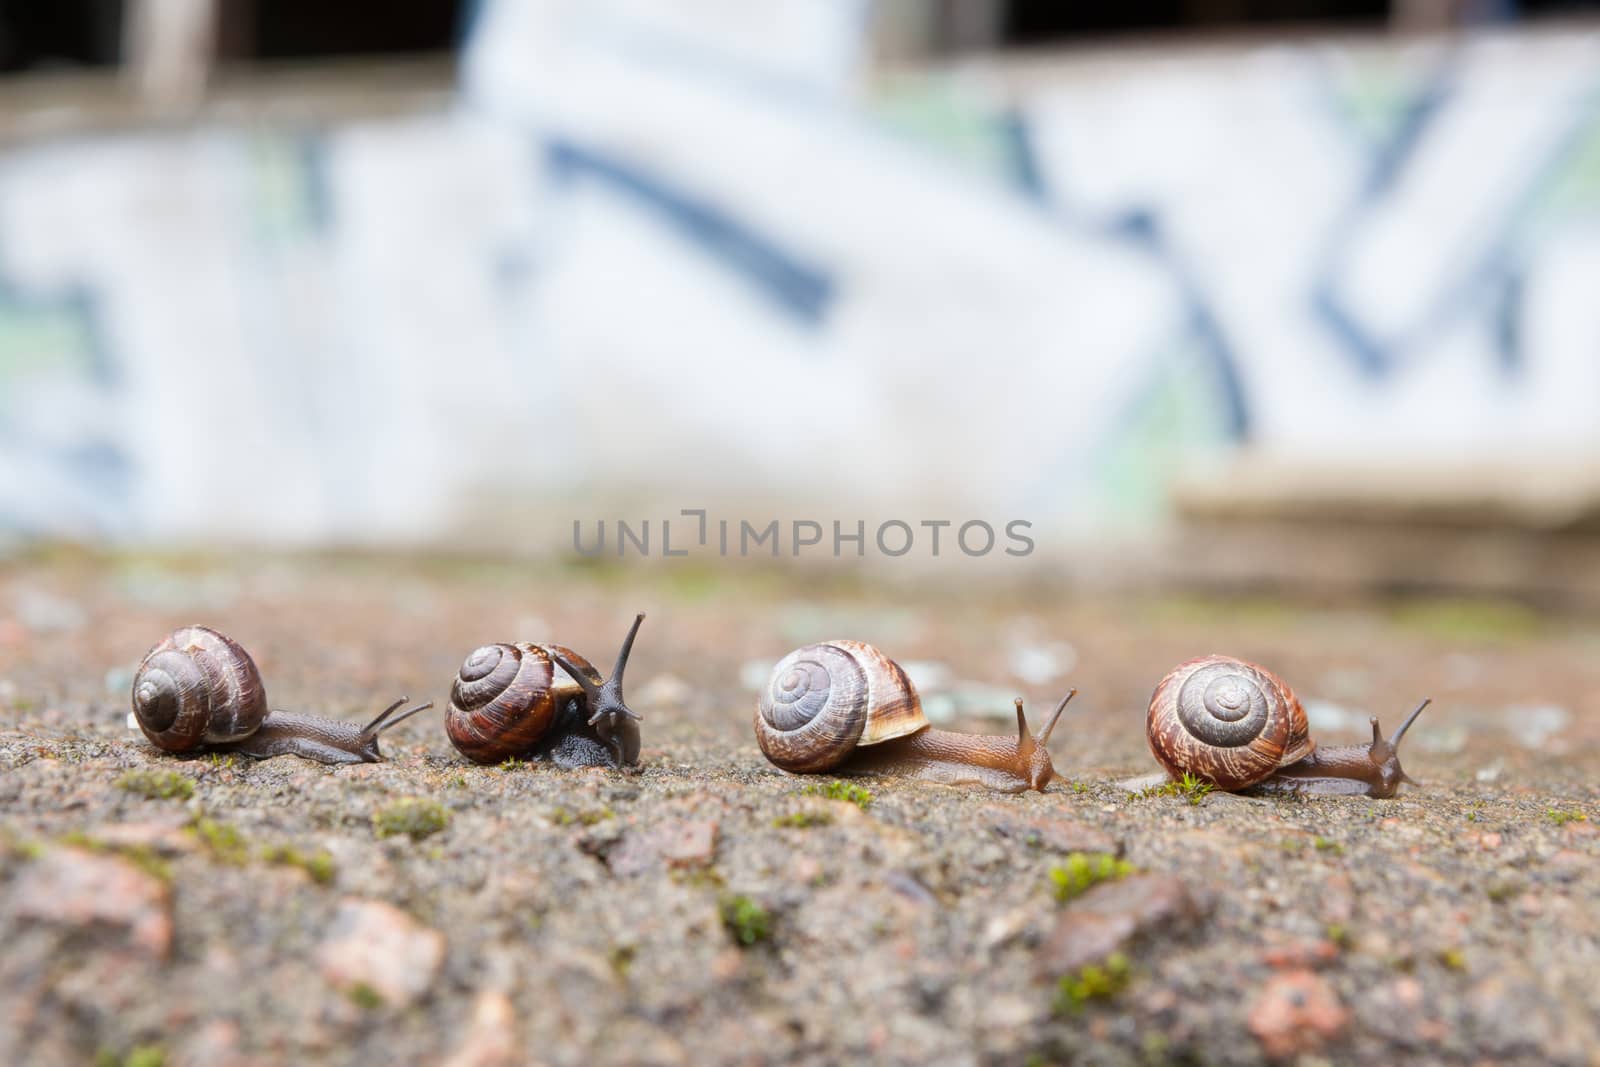 Group of small snails going forward by juhku